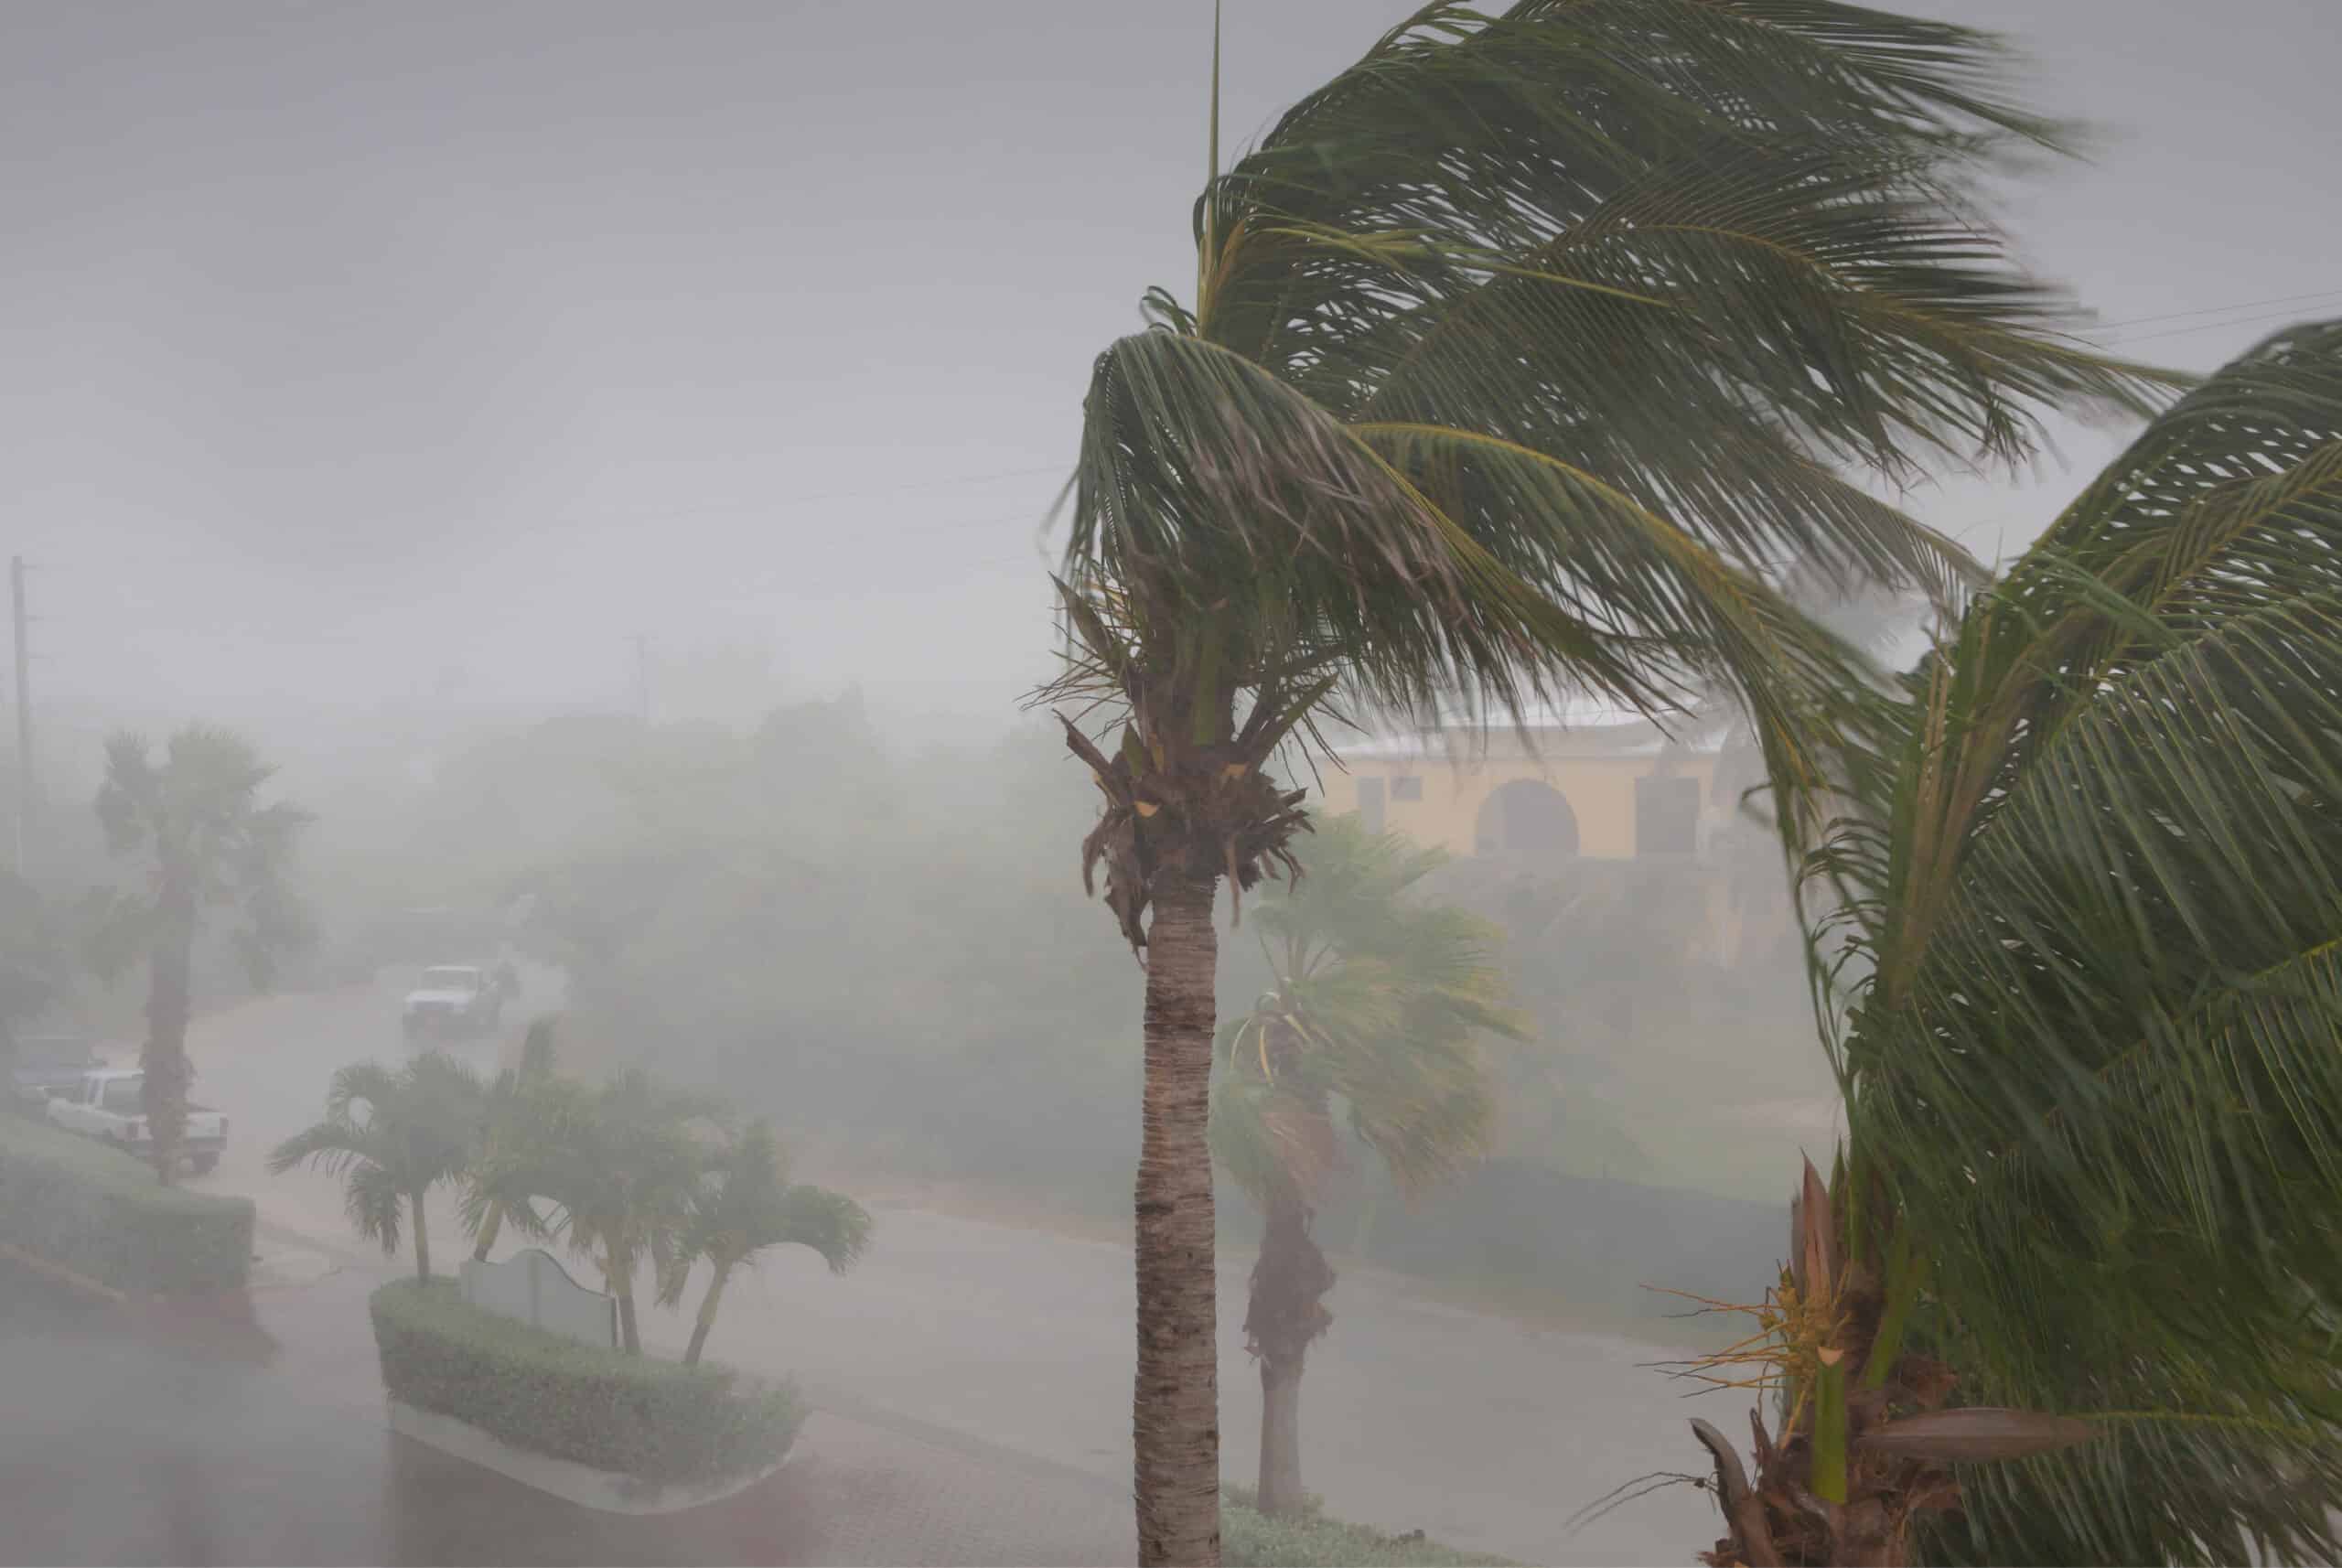 Palm trees bending in strong wind during a heavy rainstorm along a residential street with minimal visibility demonstrate the importance of Hurricane Protection and Impact Windows.